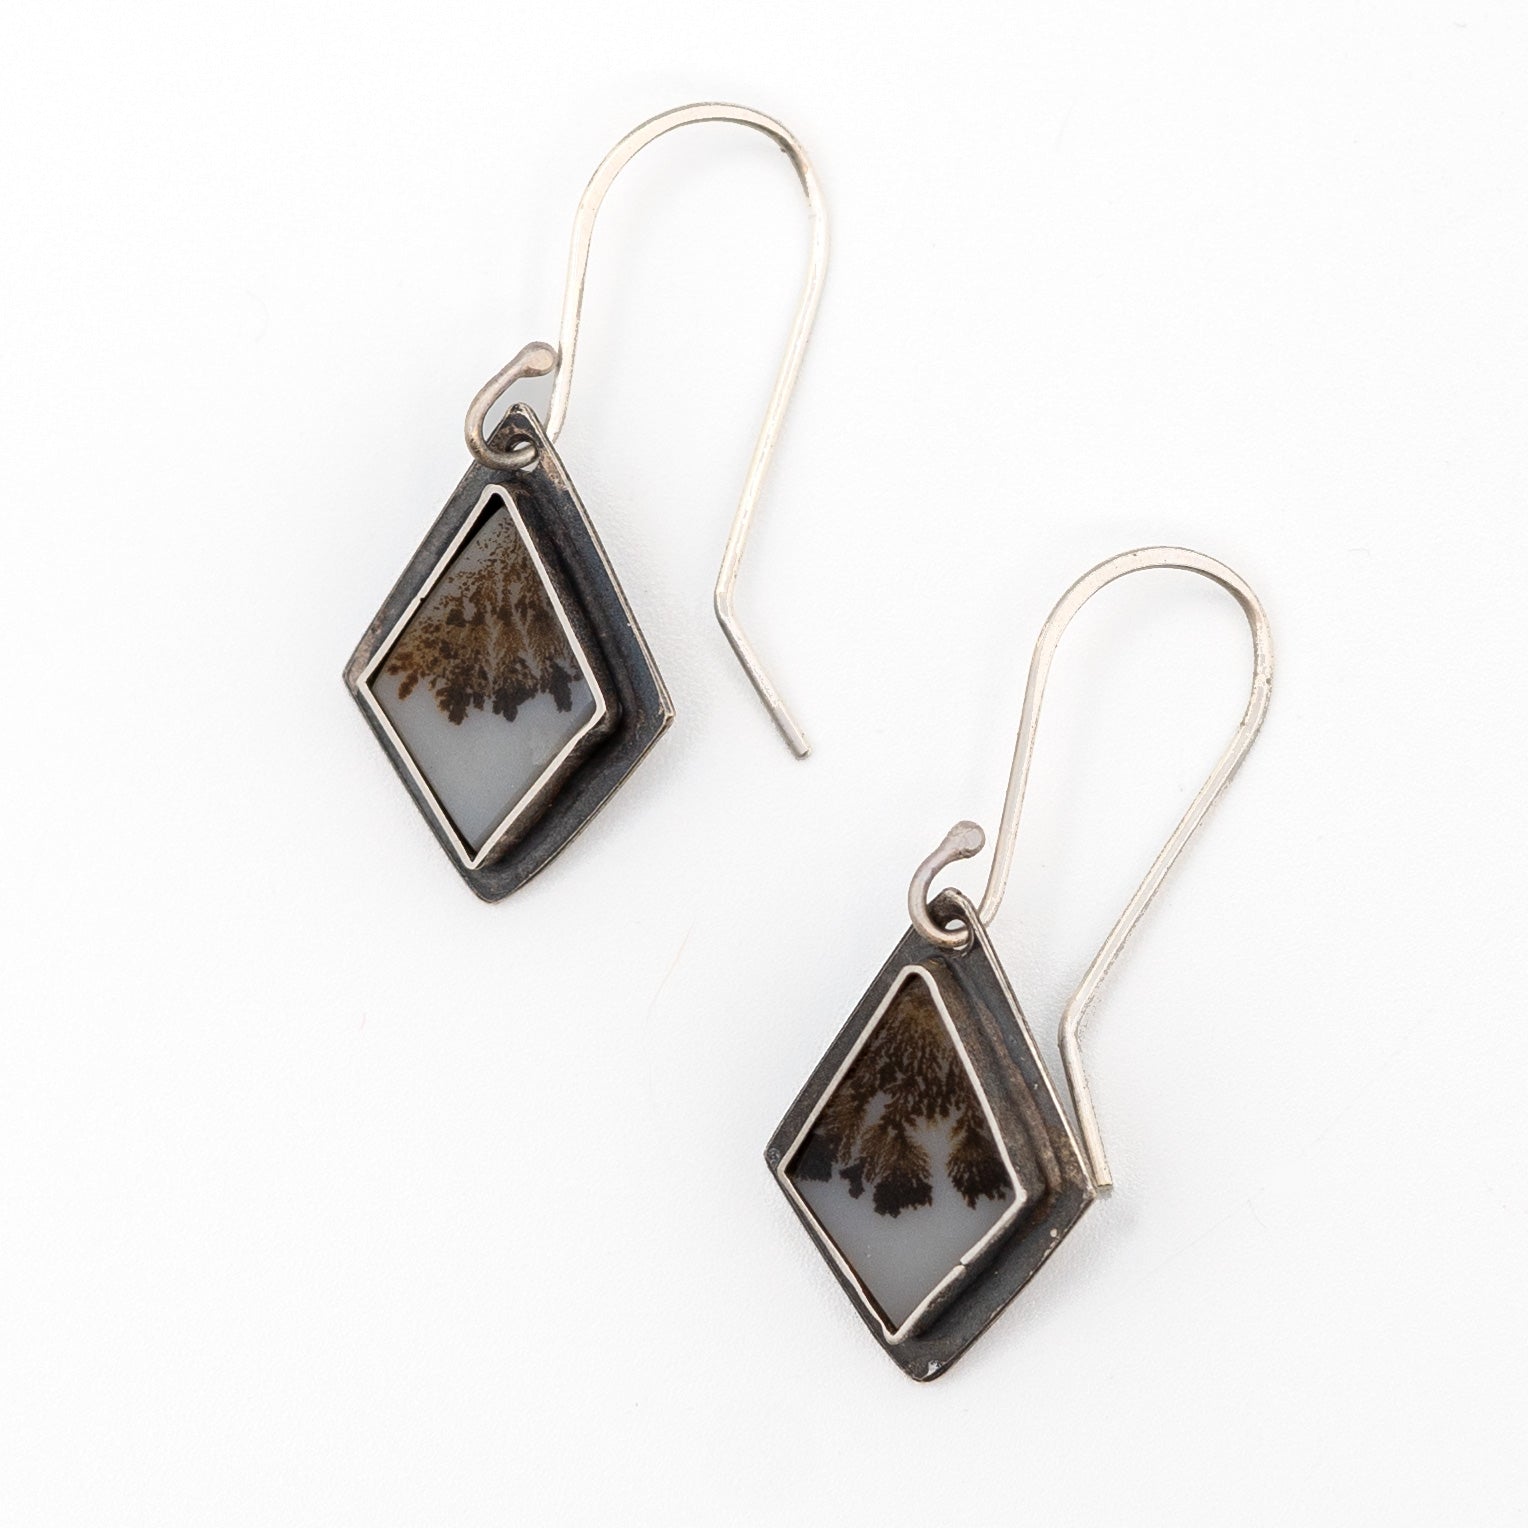 Dendritic Agates cut to diamond shapes and dangling from sterling French wires